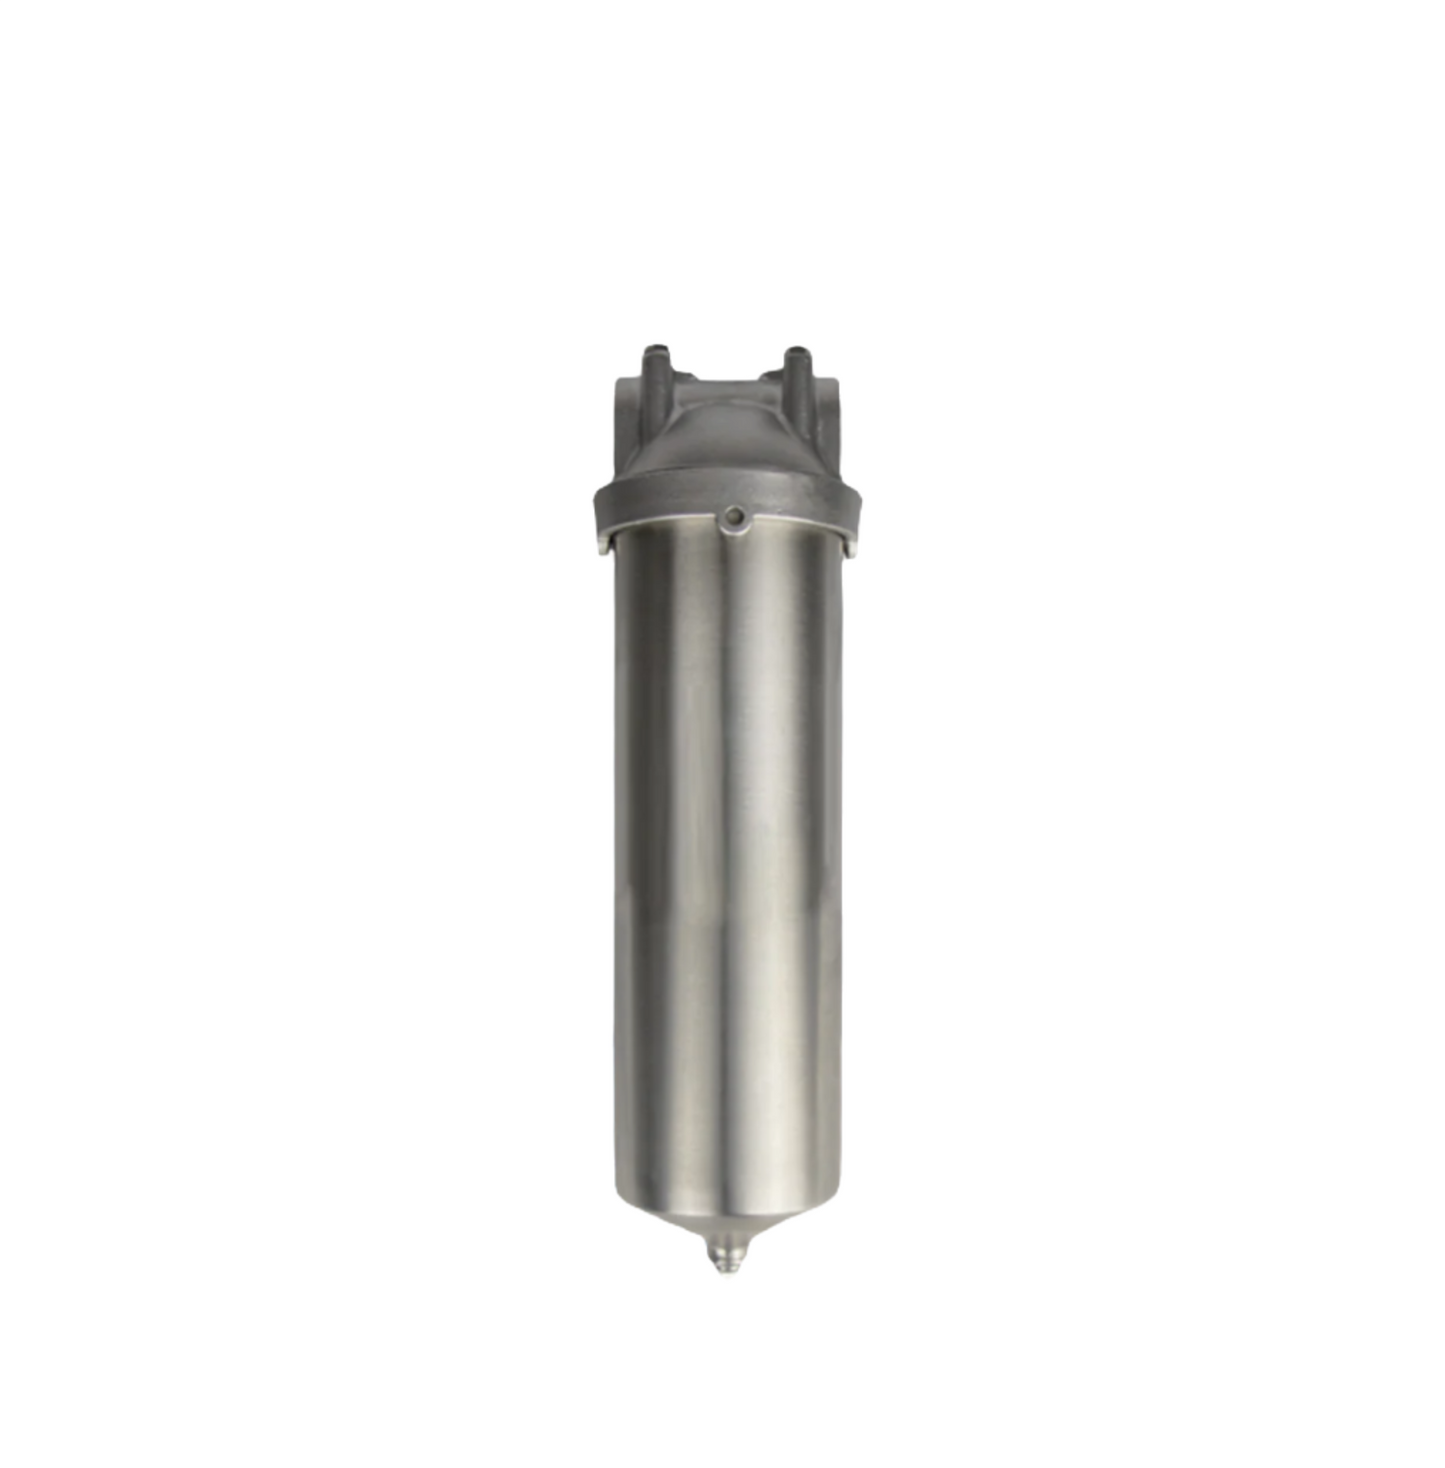 CORE Stainless Steel Filter Housing 1 x 30" With 1" Ports